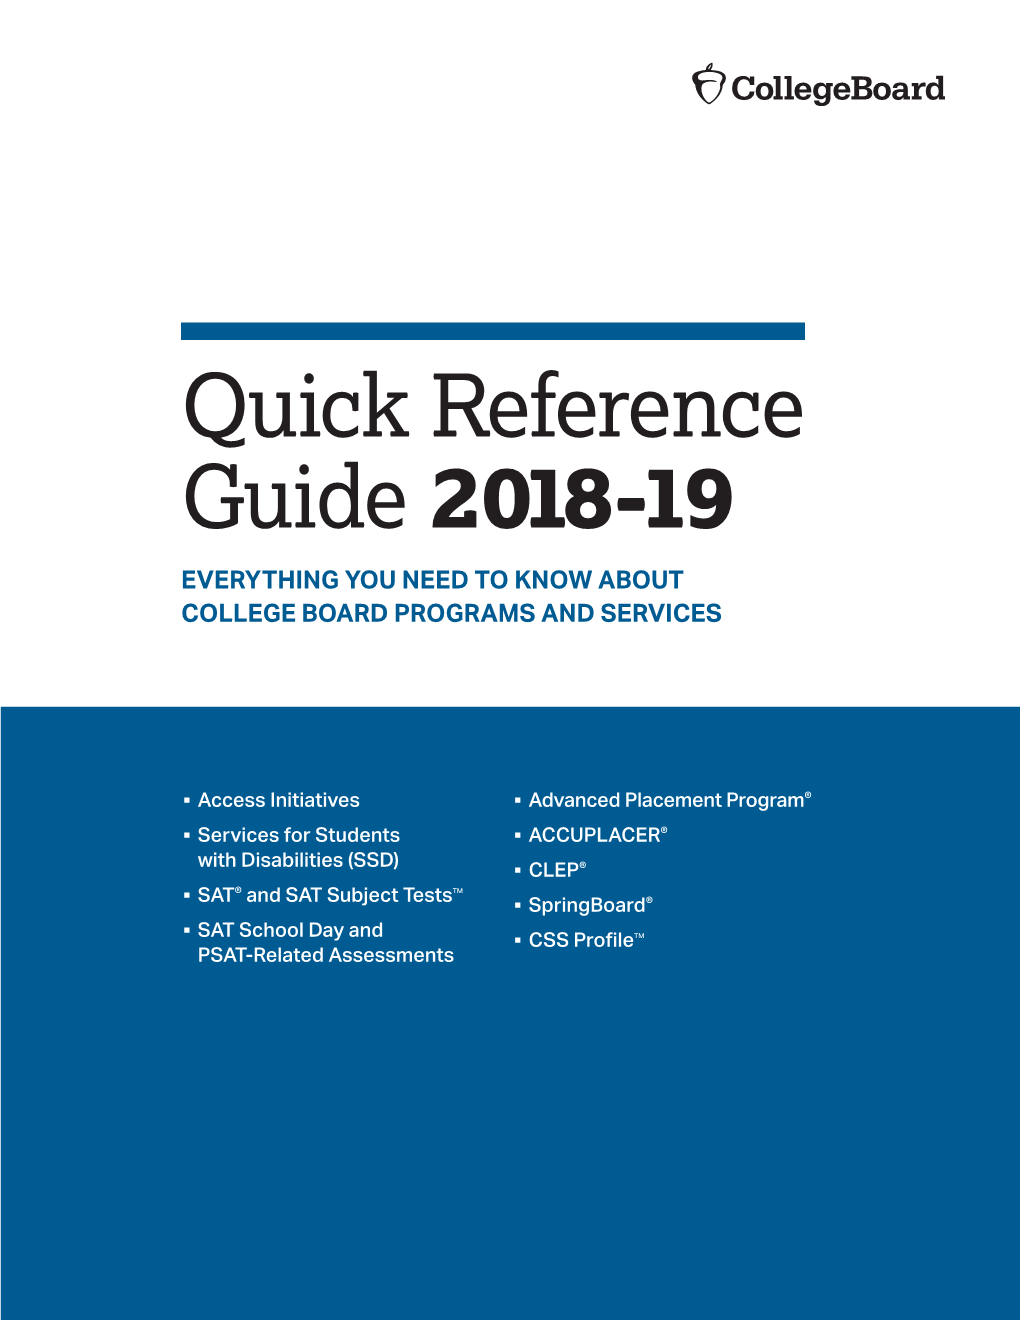 Quick Reference Guide 2018-19